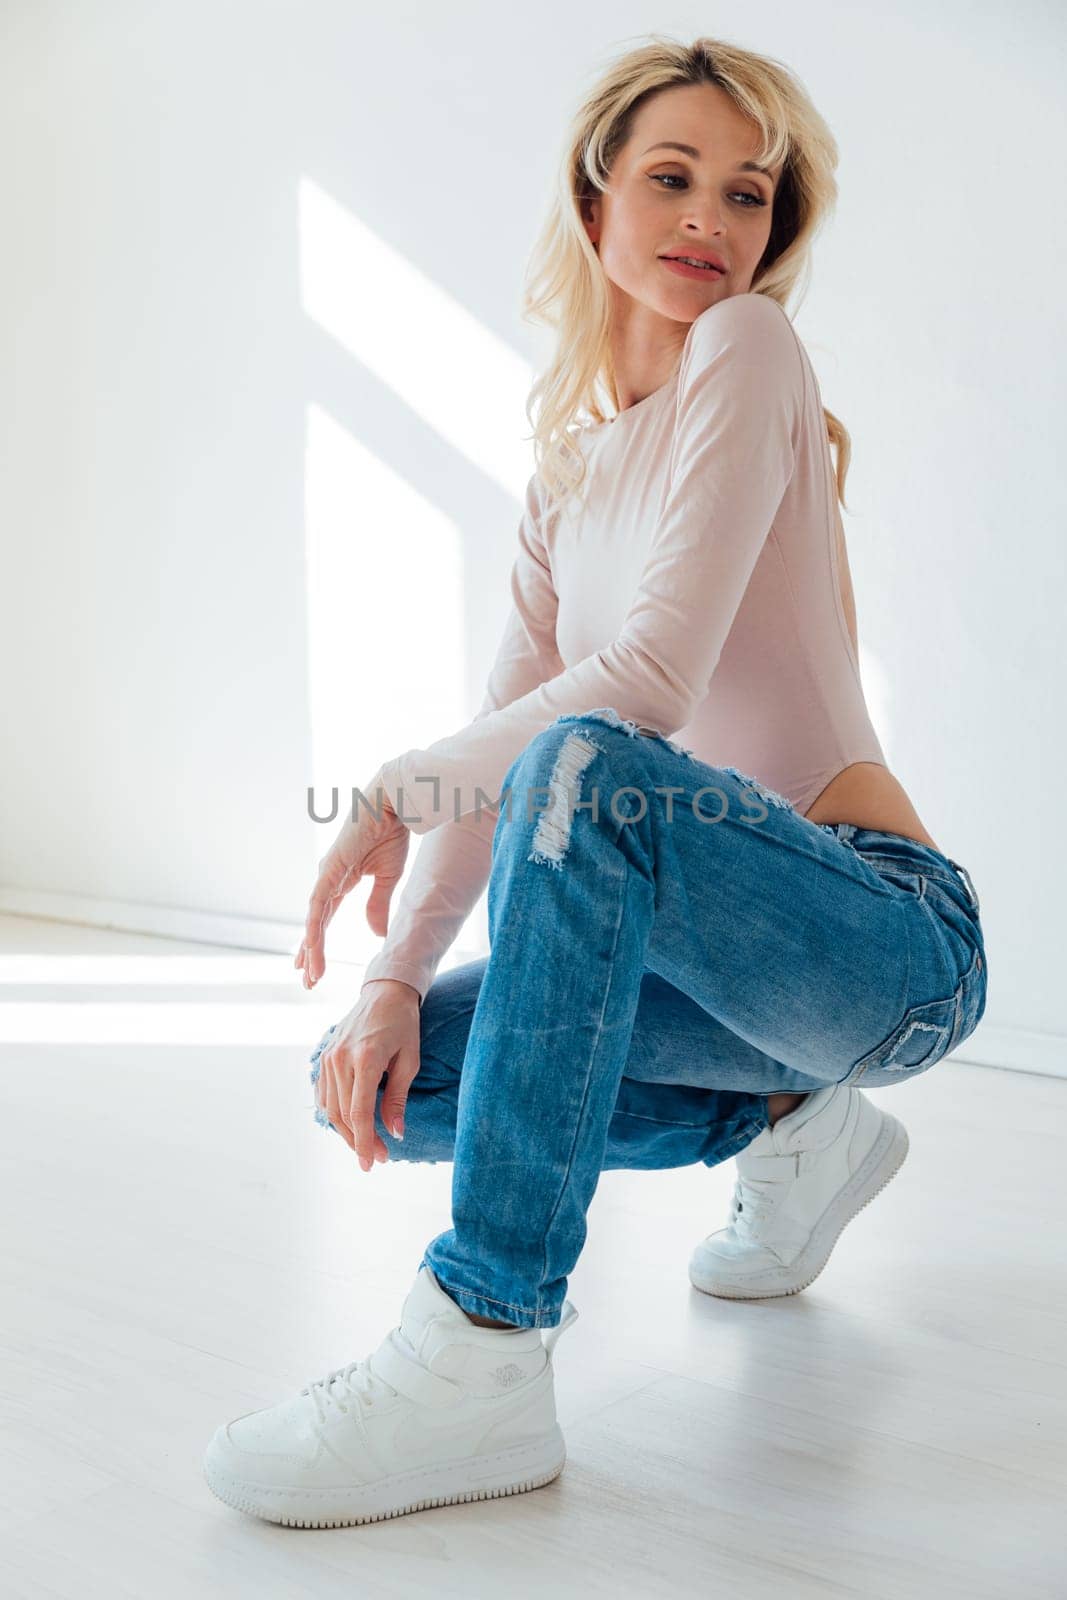 blonde woman in jeans in a bright room by Simakov